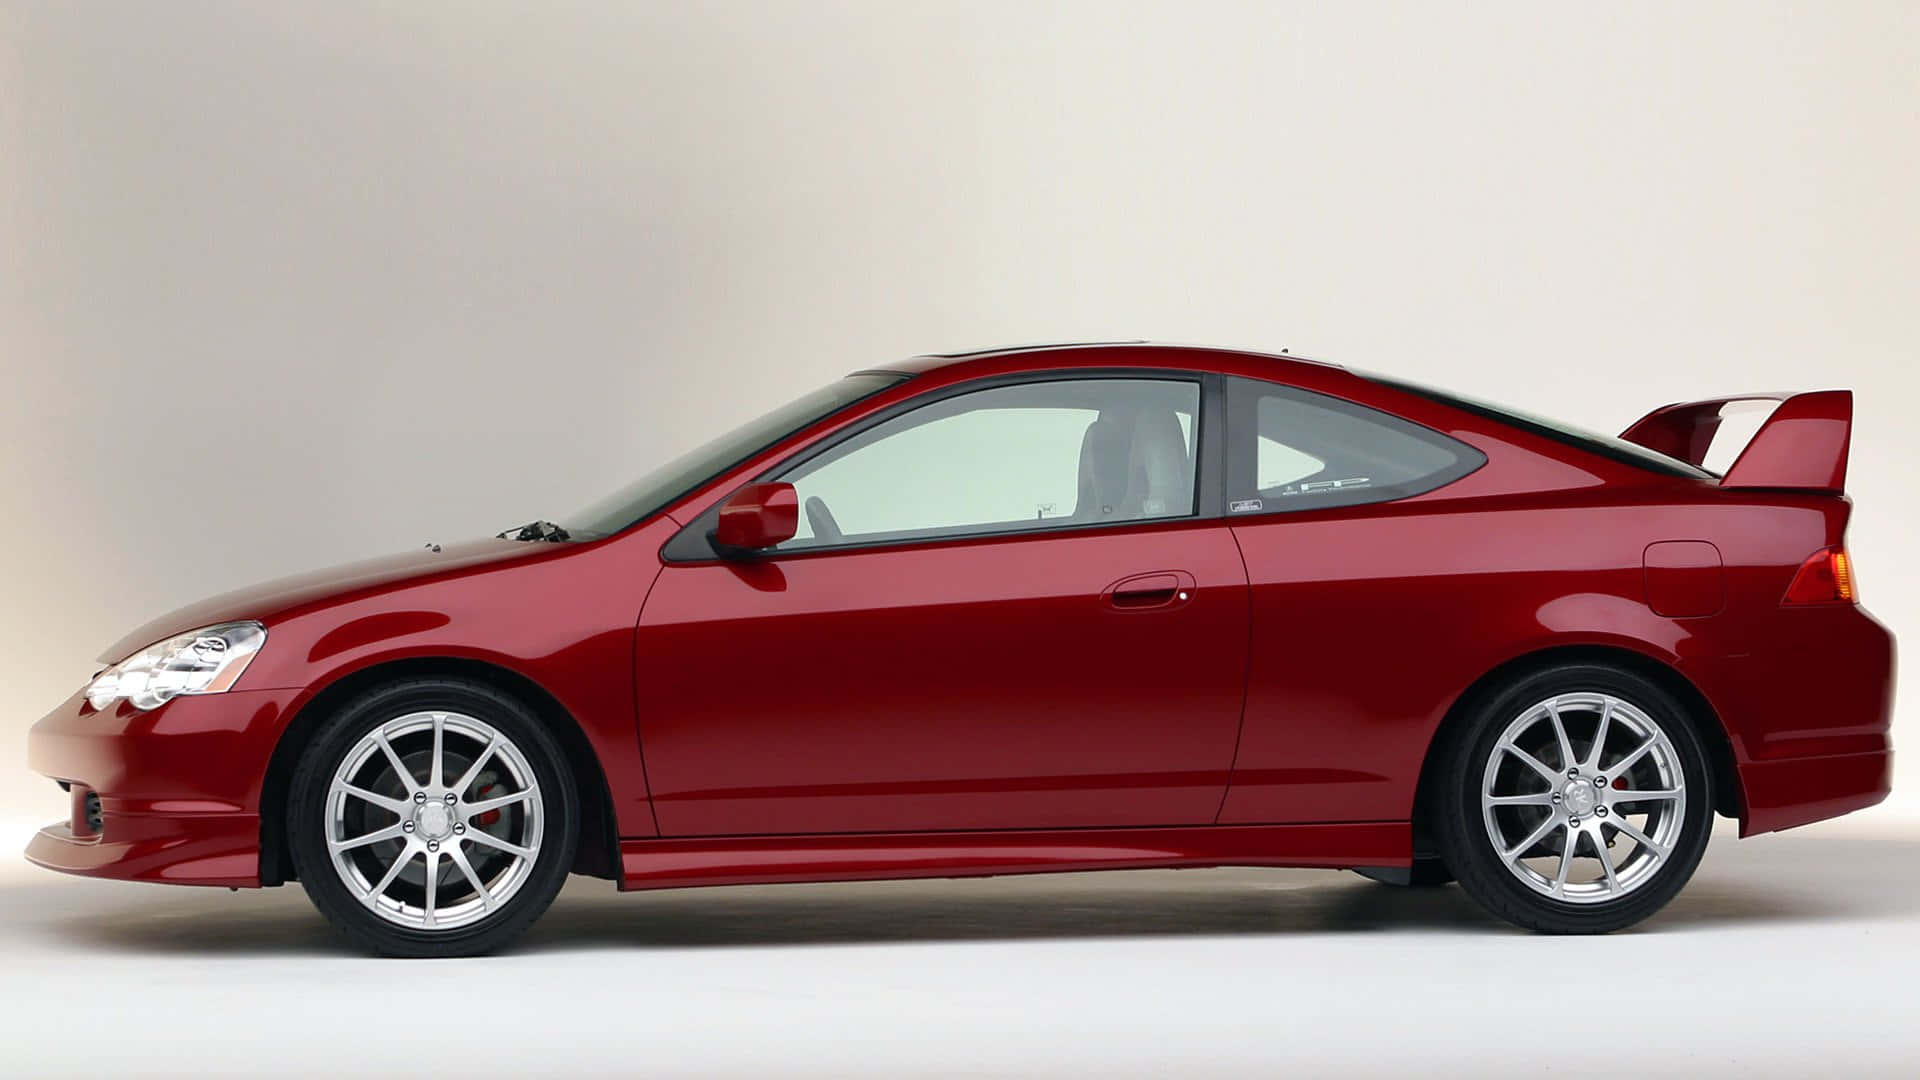 Acura RSX Sporty Coupe Car Wallpaper